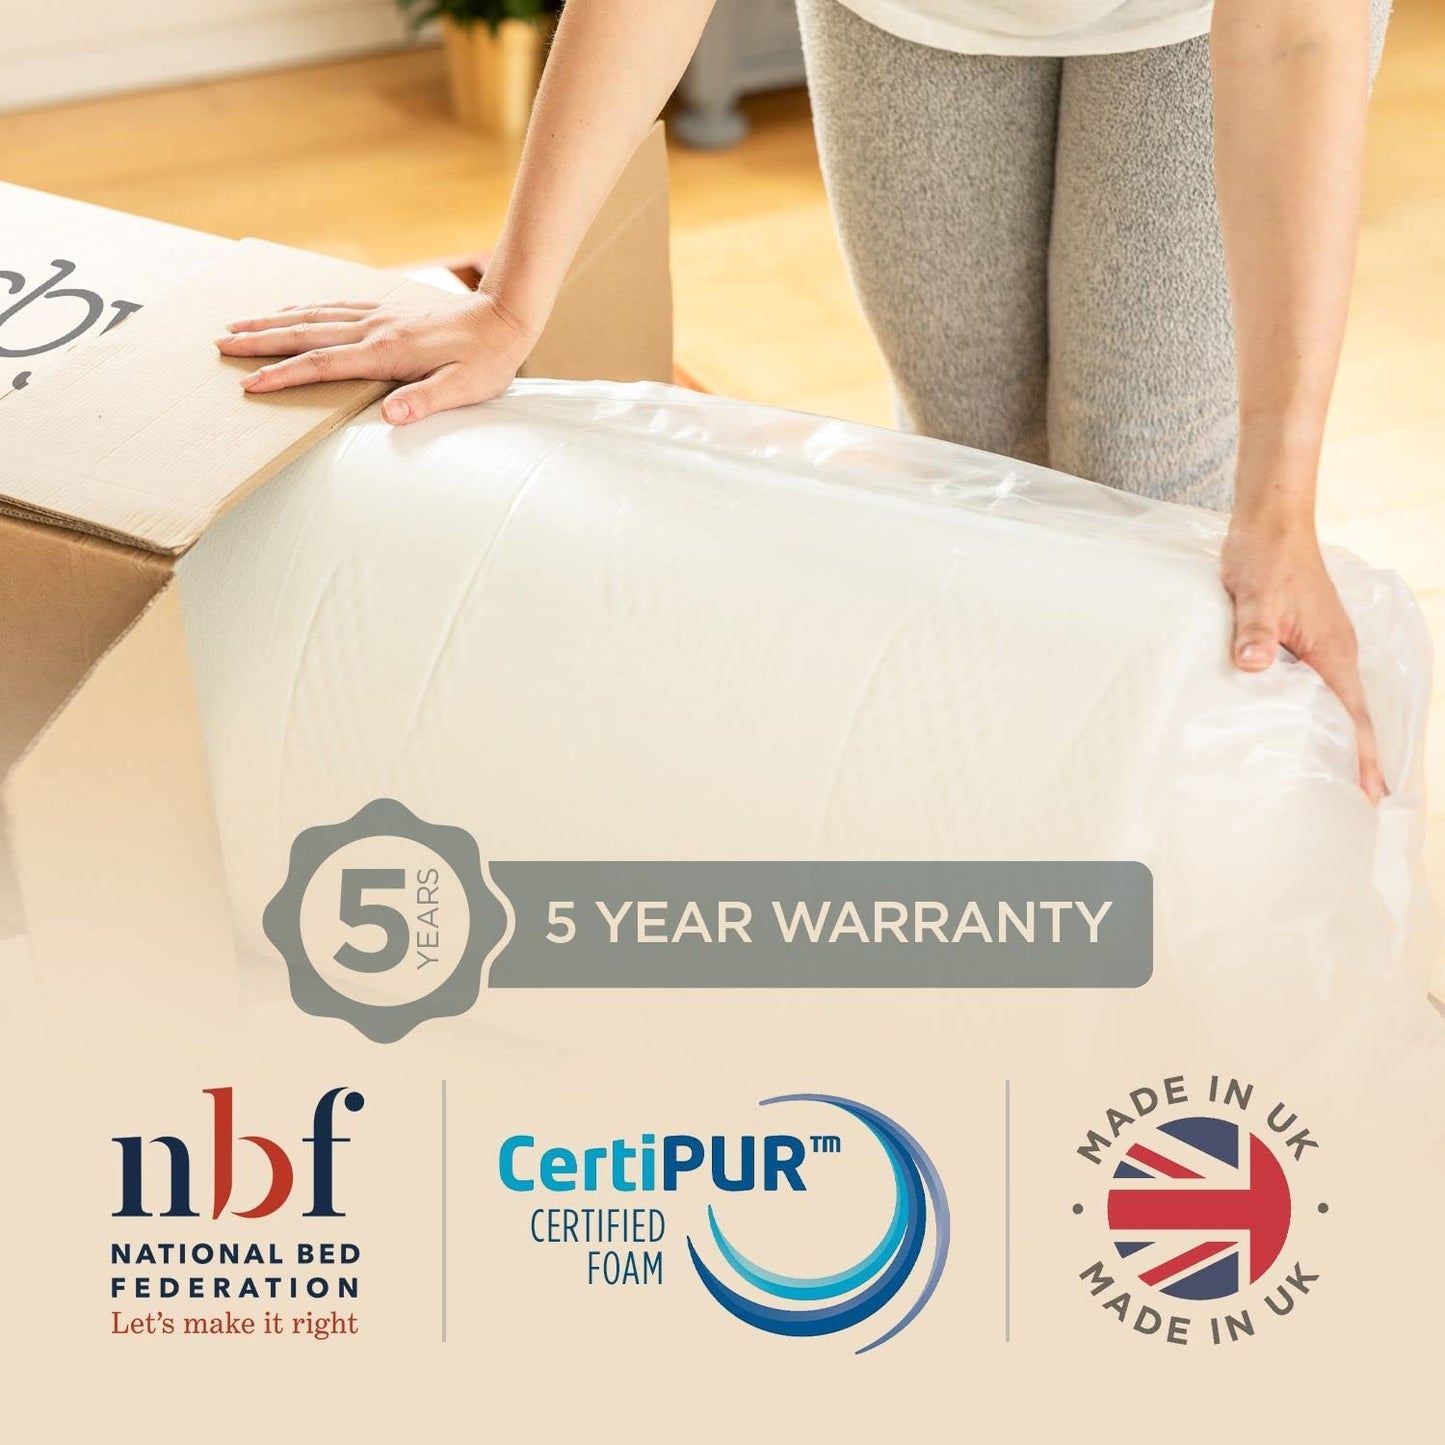 Sleep' No5. Pocket Spring and Memory Foam 'Climate Control' Mattress | Double: 137Cm X 190Cm